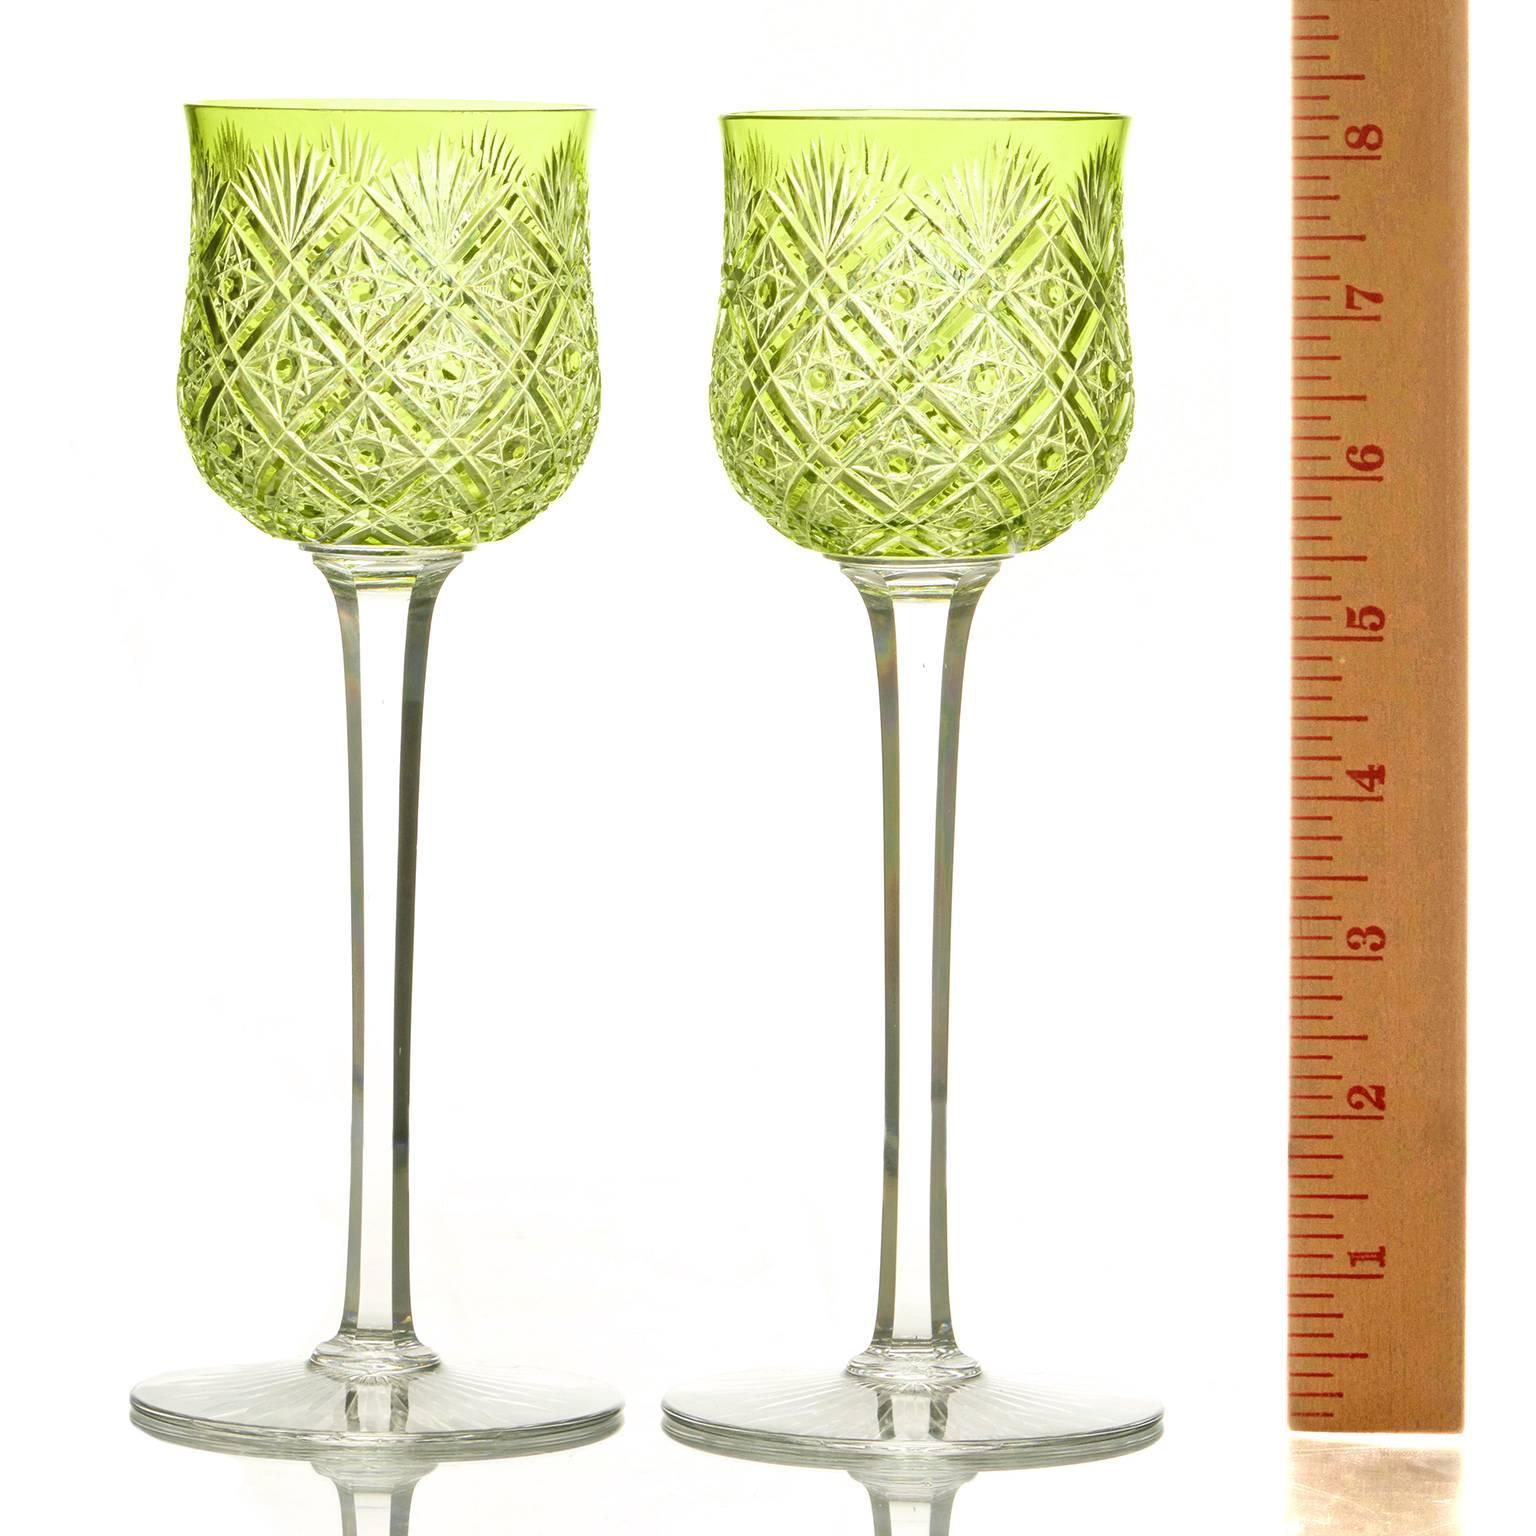 French 12 Baccarat Cut Crystal Wine Goblets in Chartreuse